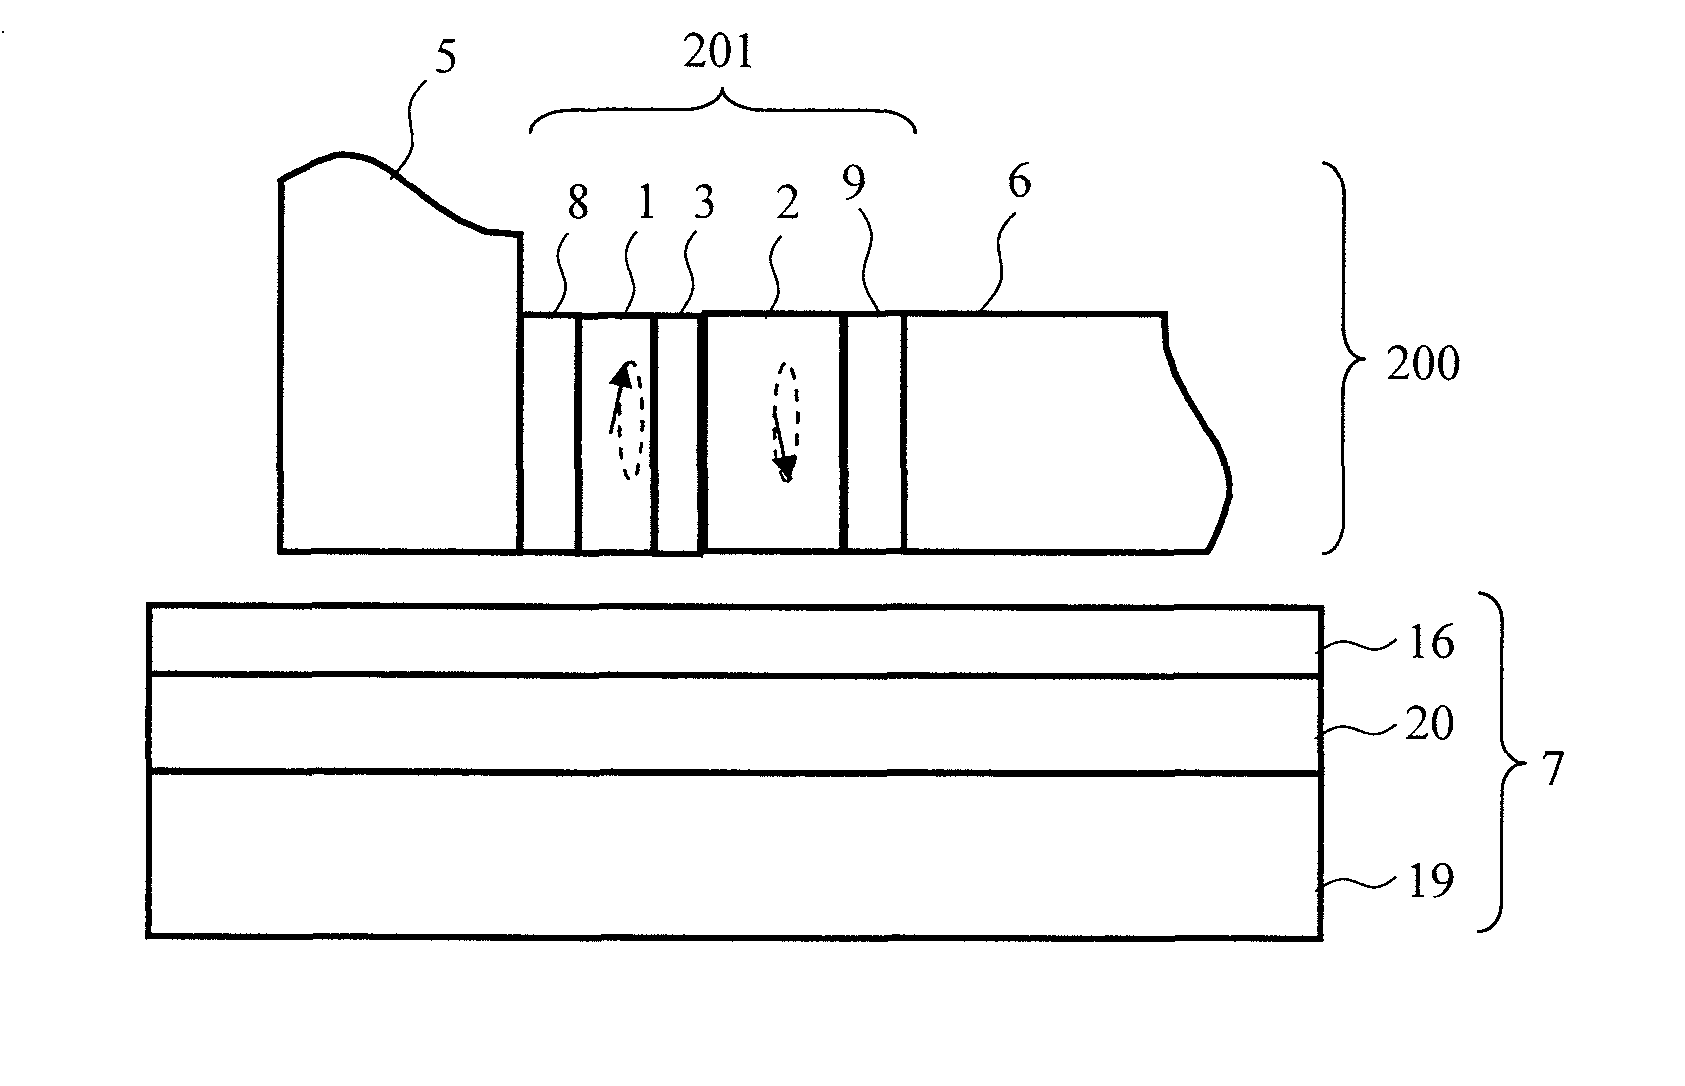 Magnetic recording apparatus with magnetic recording head capable of recording information on a magnetic recording medium